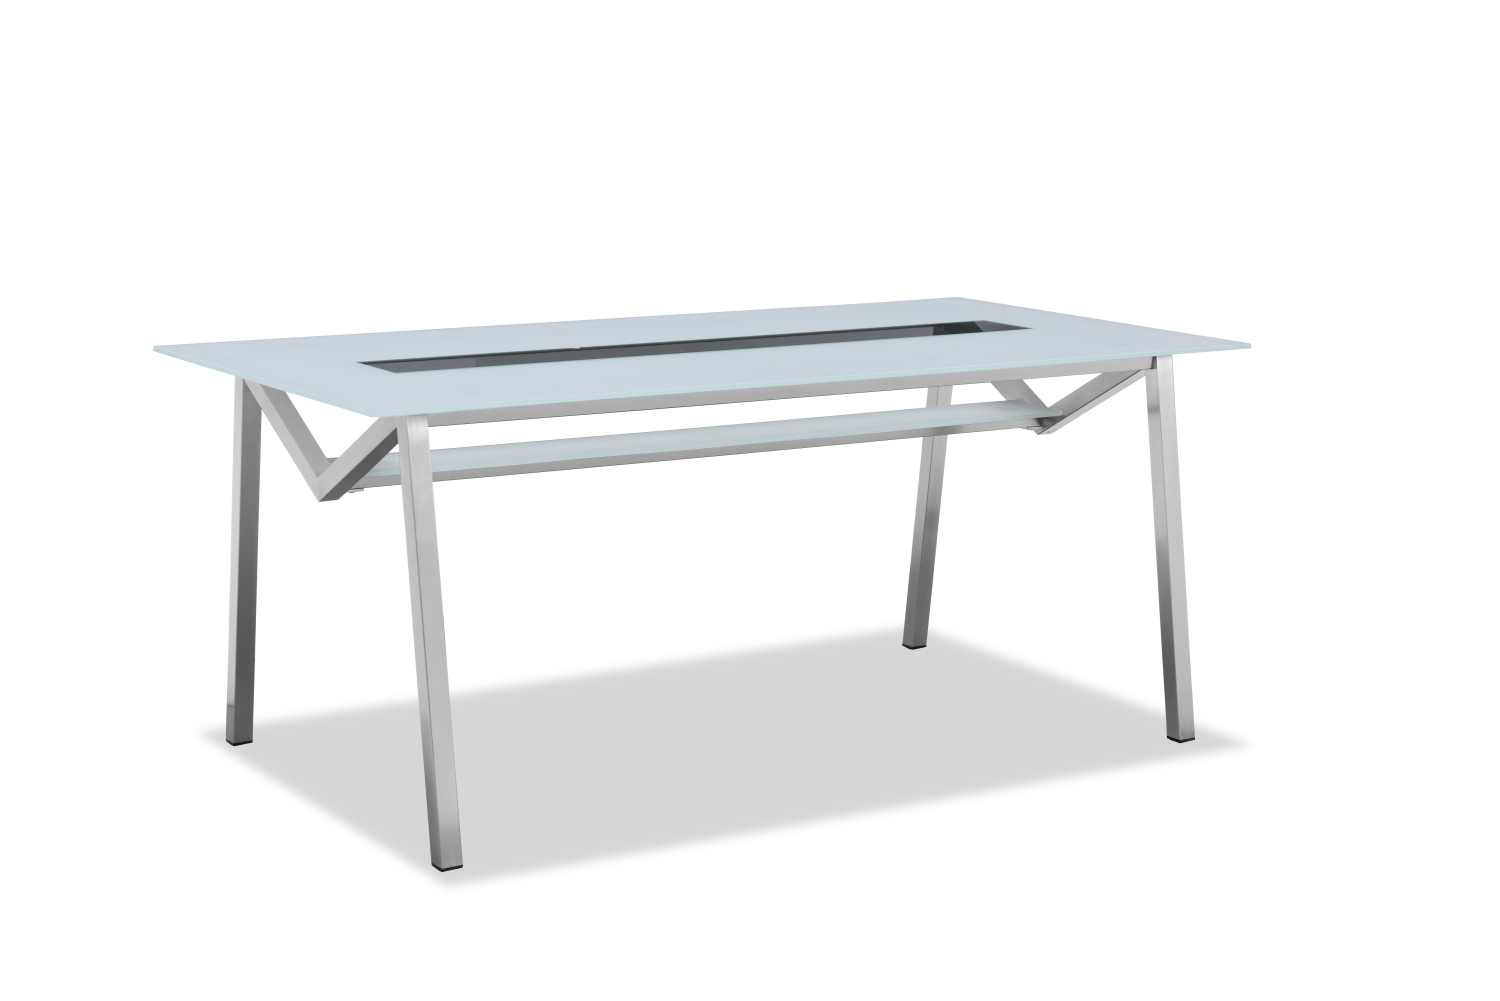 Outdoor glass dining table (T302G)